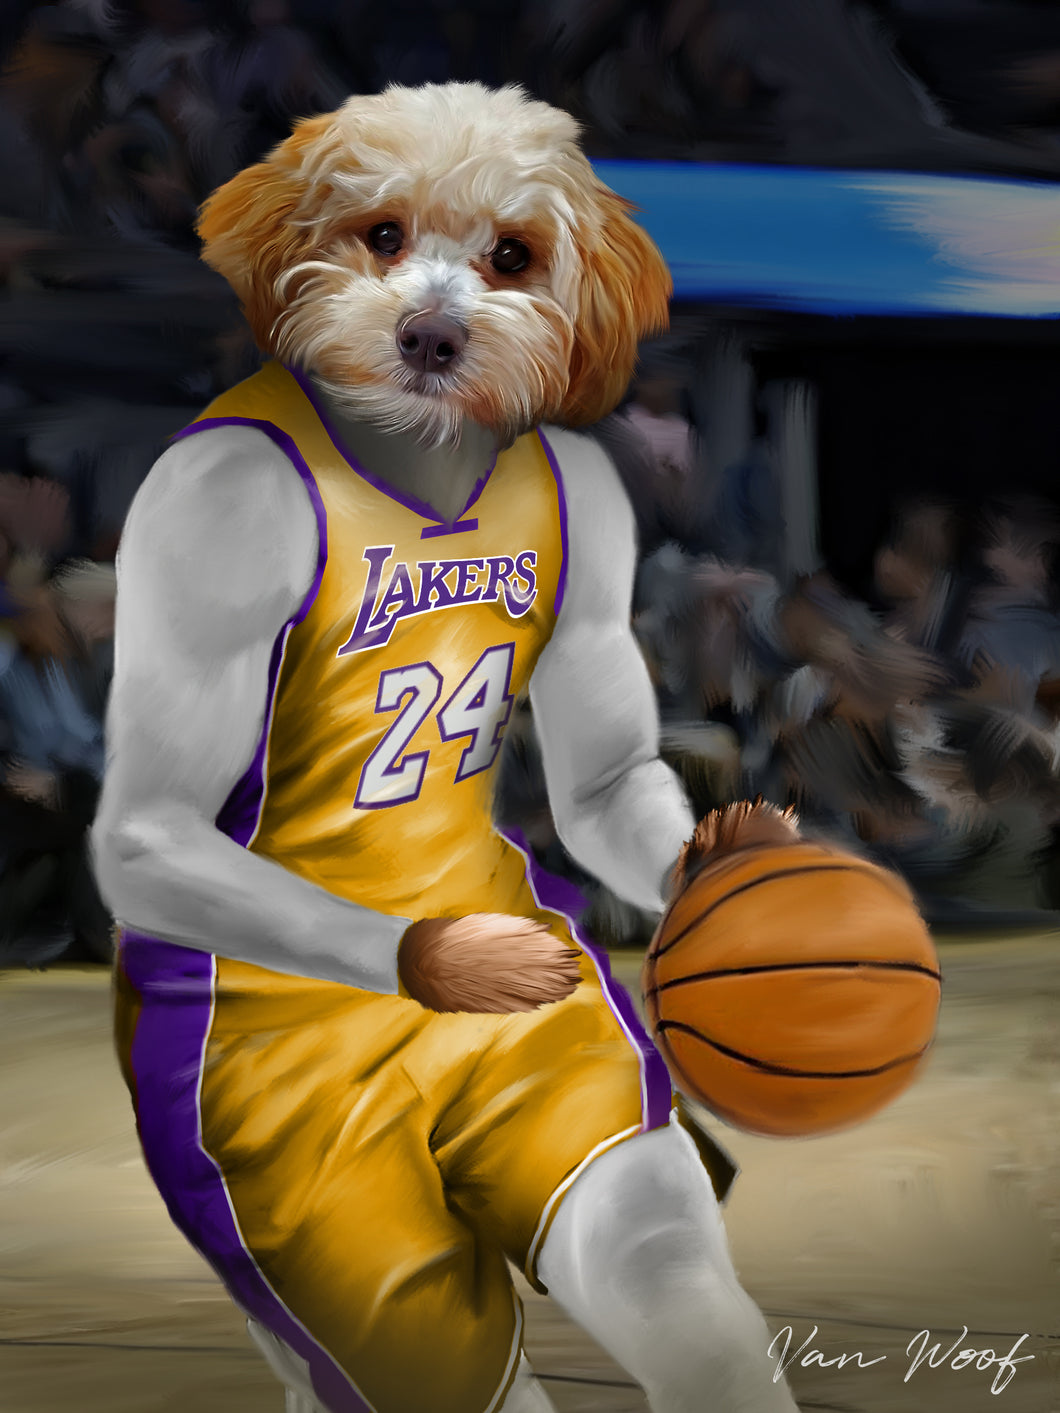 Los Angeles Lakers Basketball Player